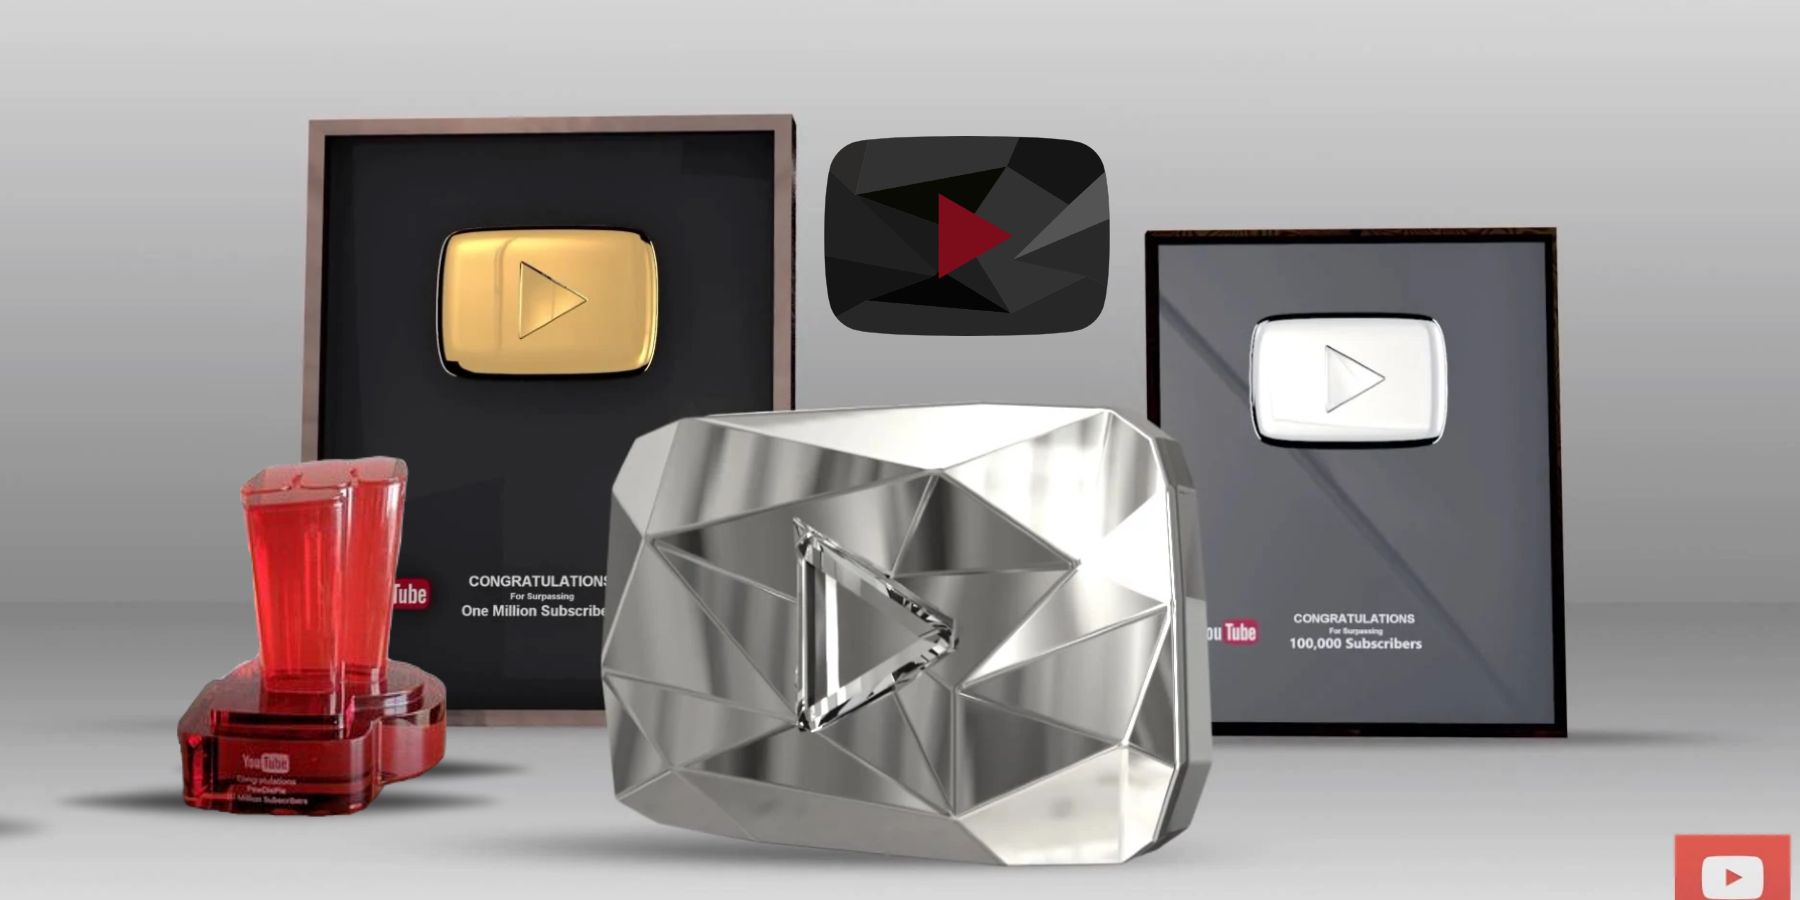 Creator Awards List: All the Play Buttons and How You Get Them